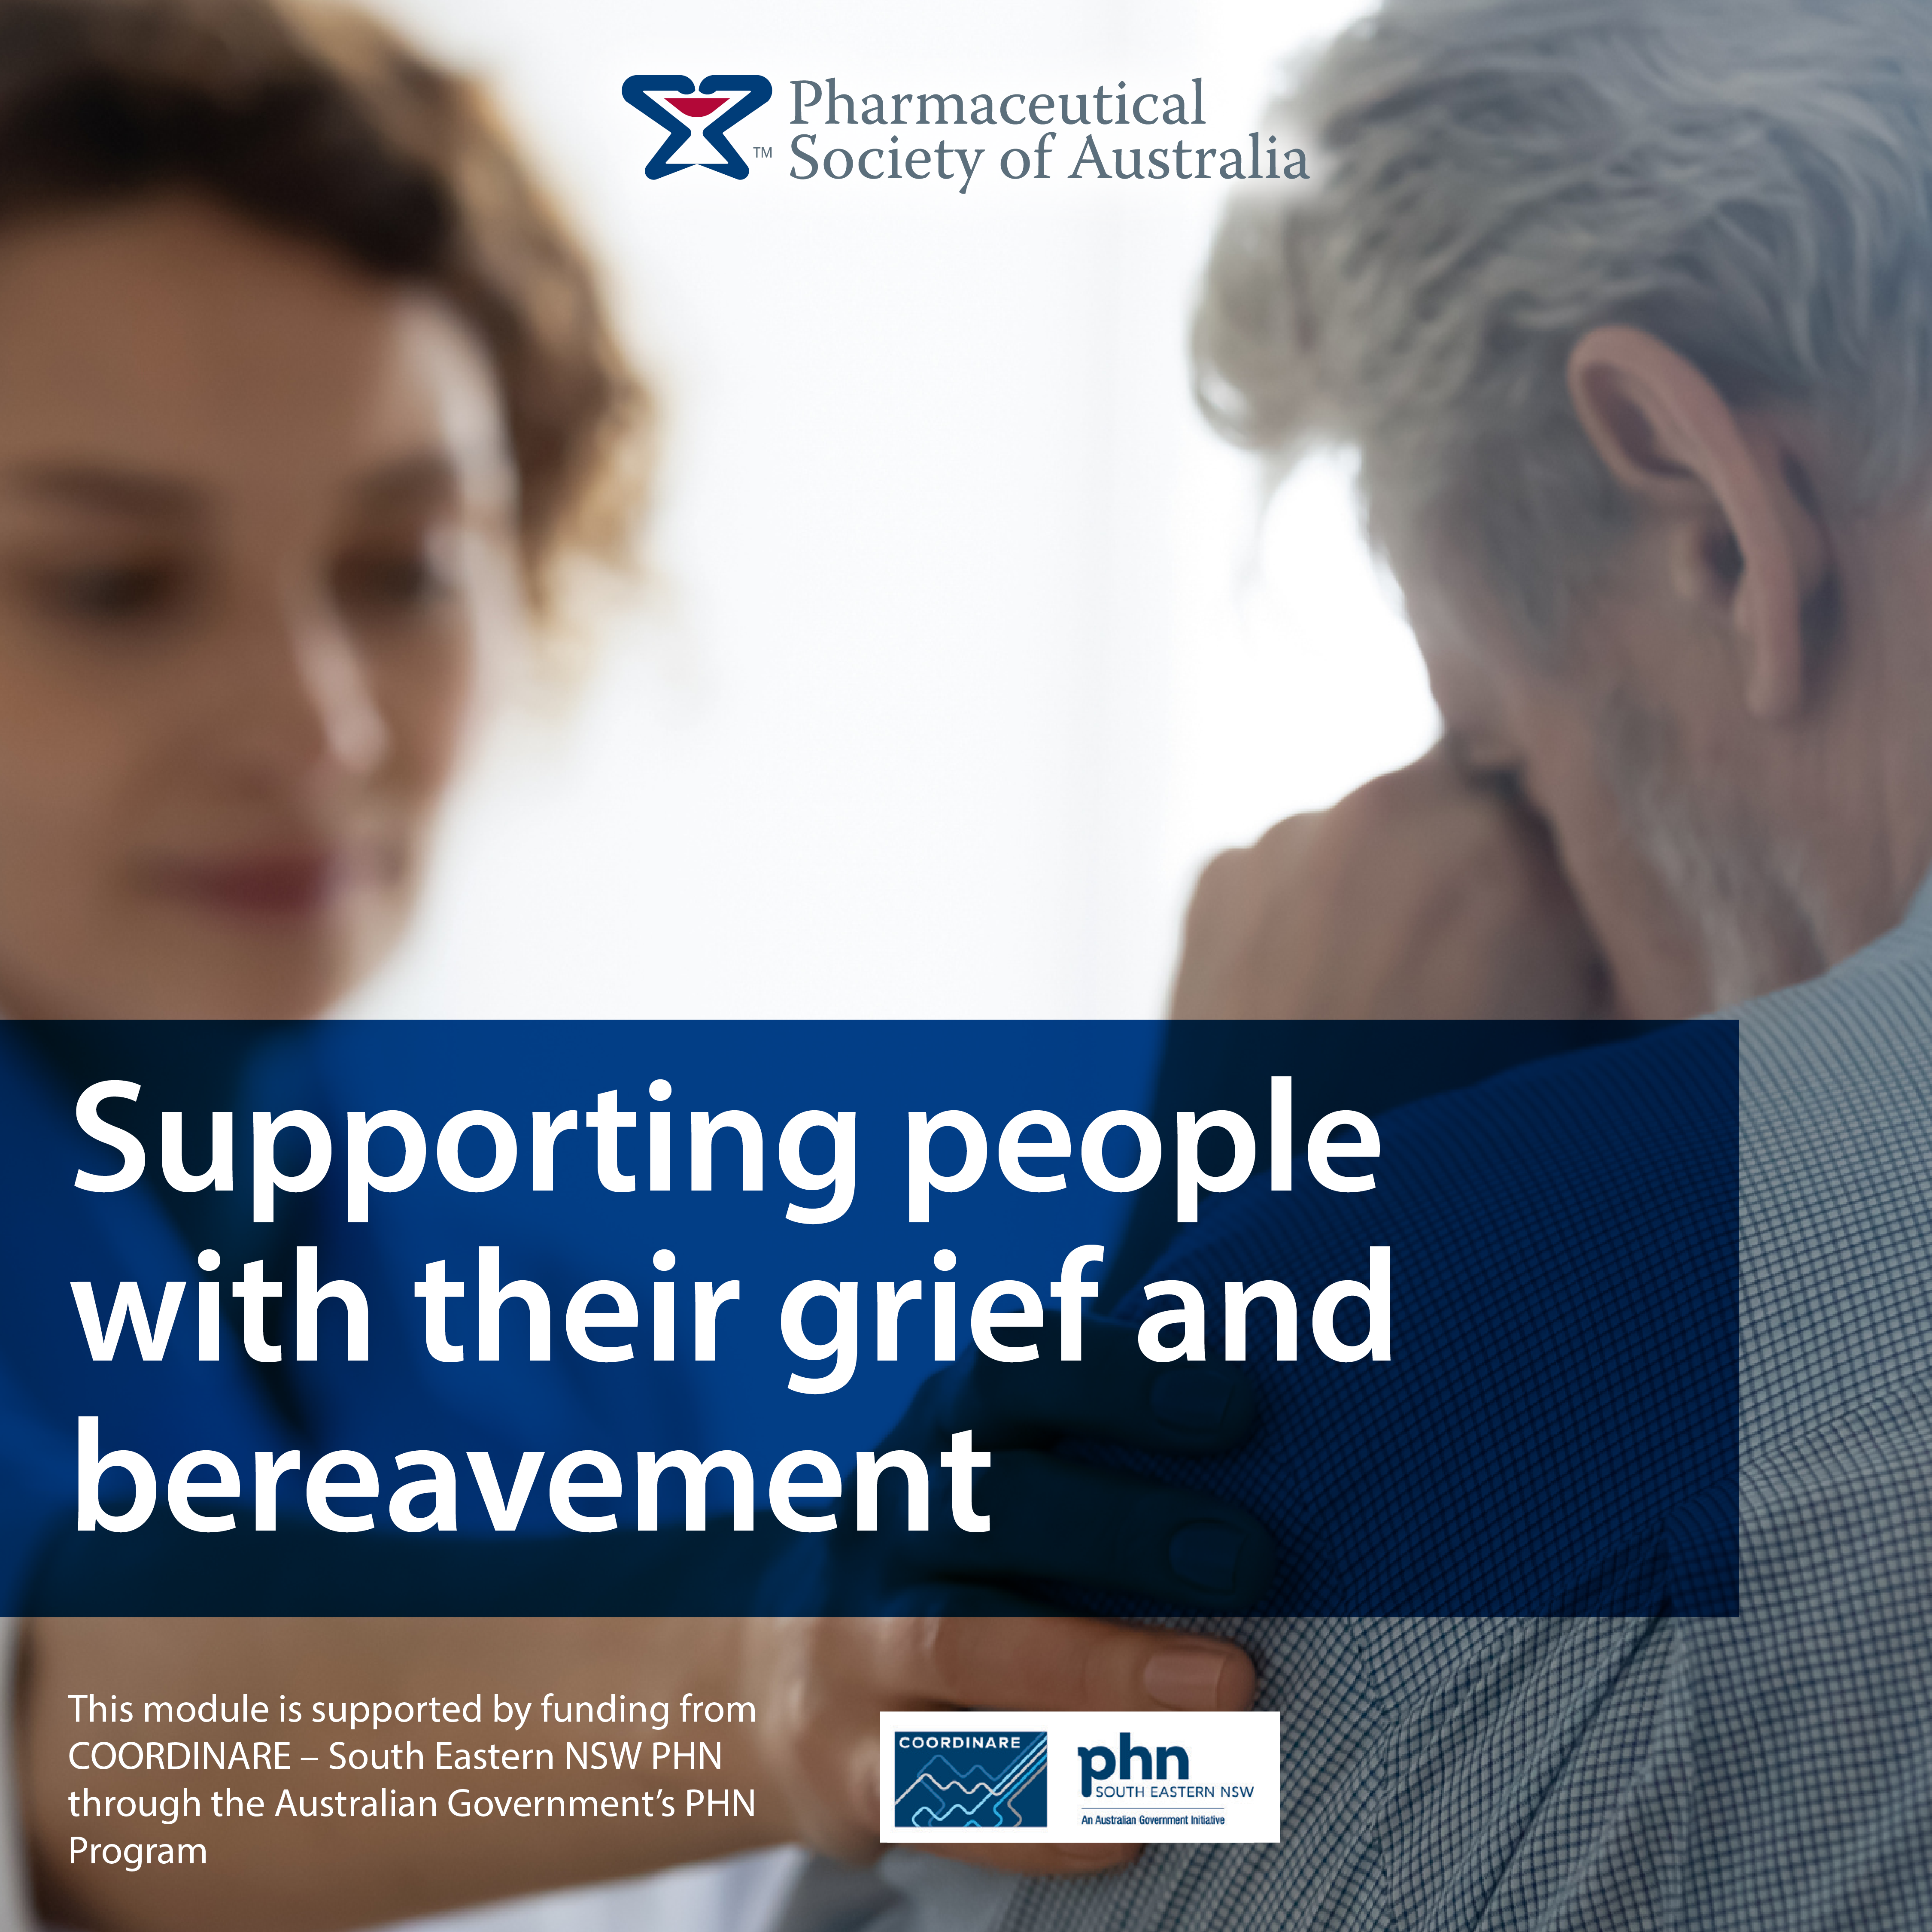 Made in the Illawarra - National Bereavement Training Module for Community Pharmacy